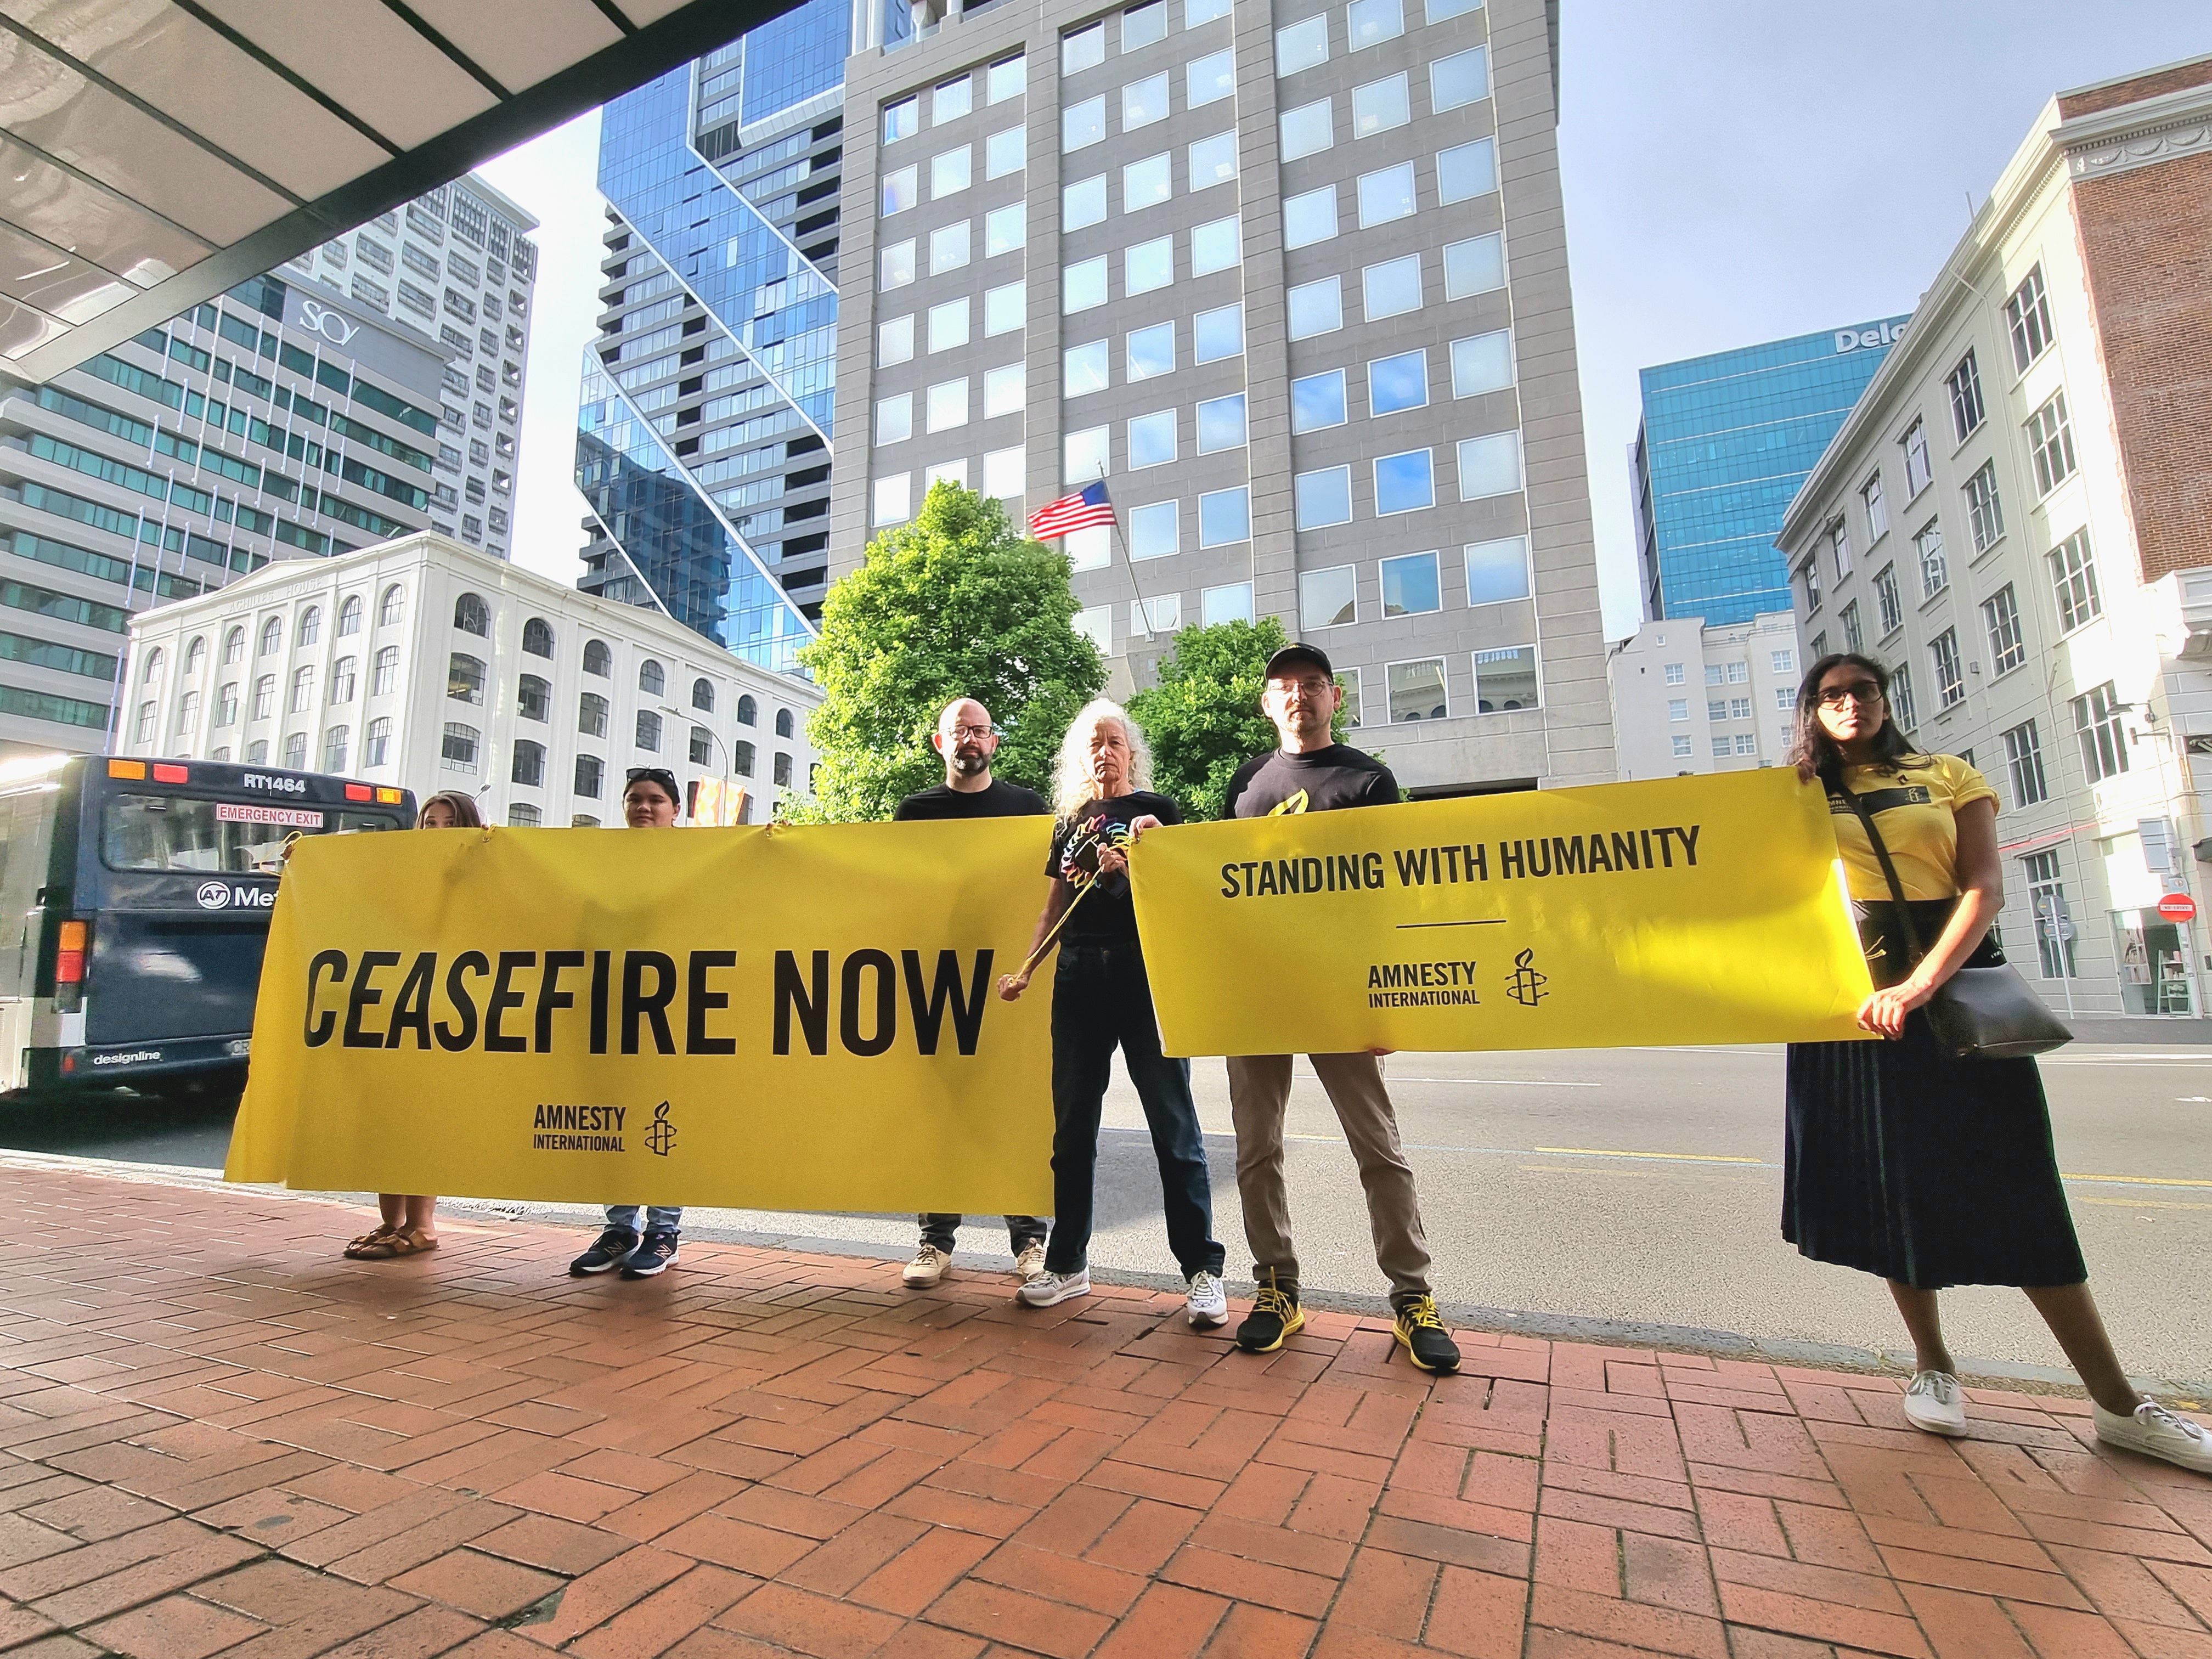 Amnesty supporters hold signs calling for a ceasefire in Gaza